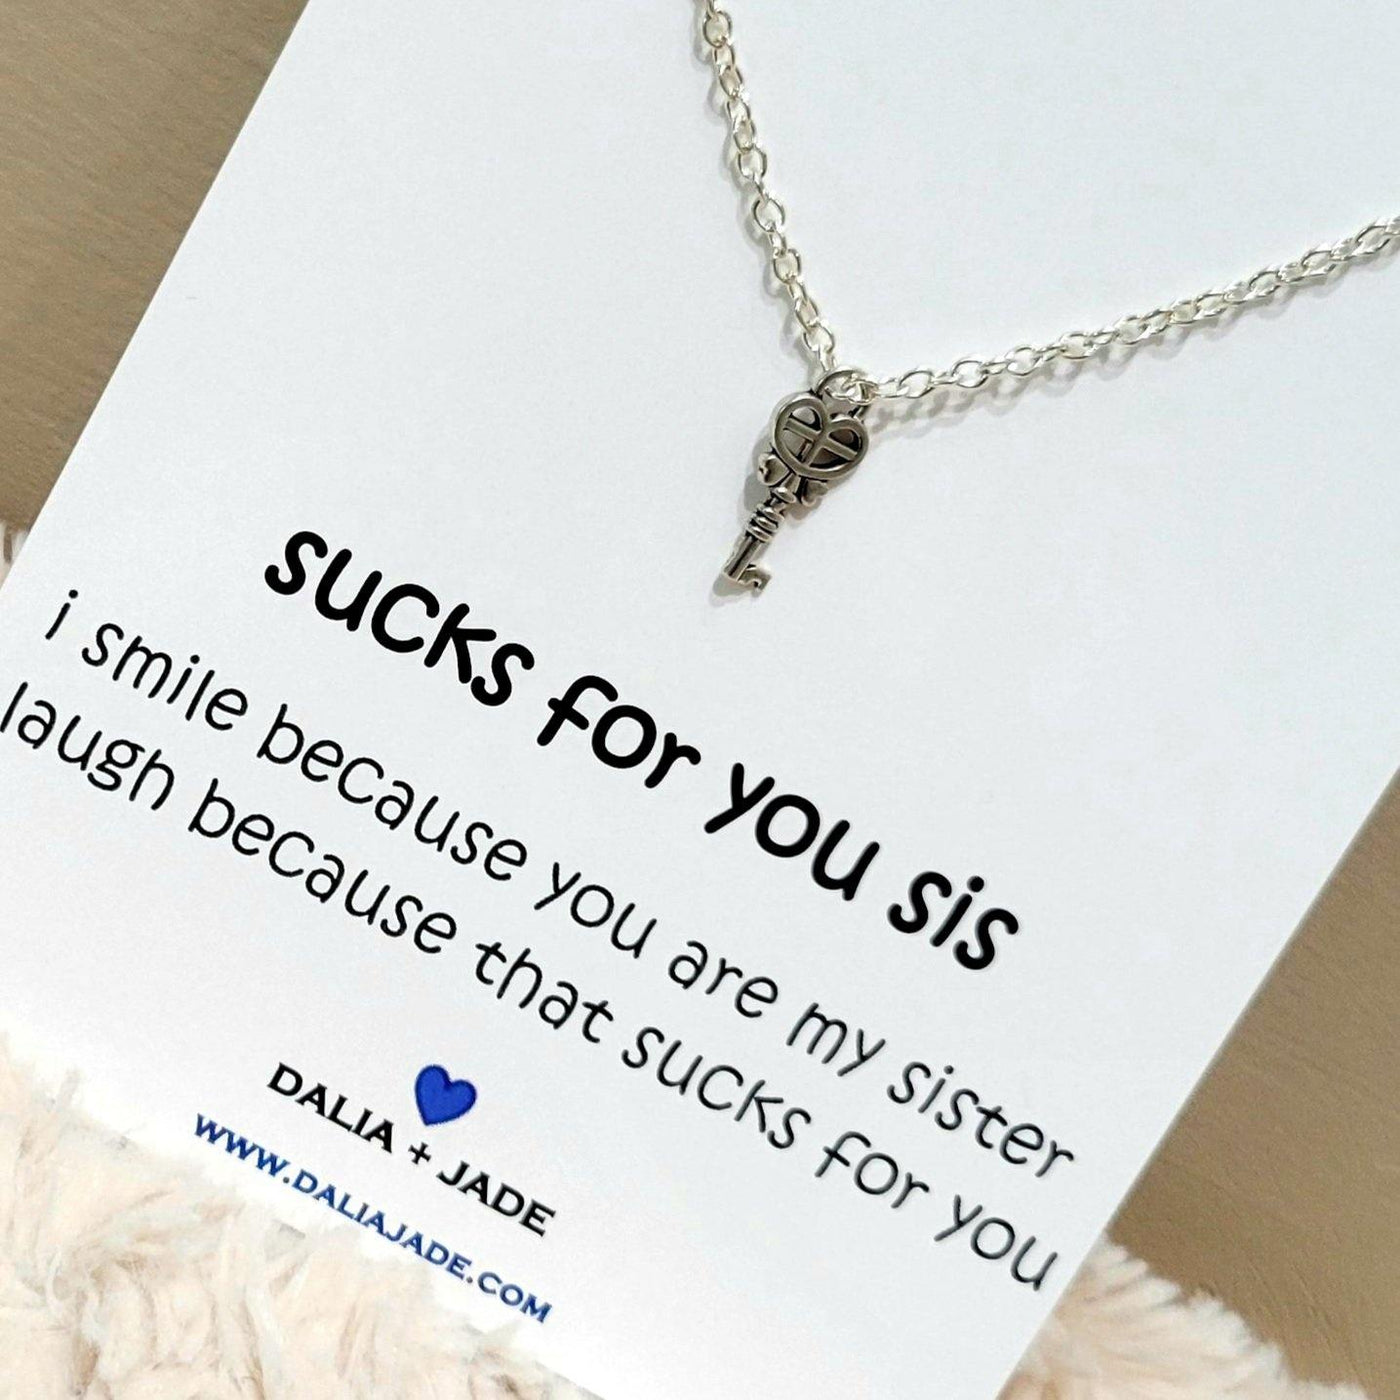 Sucks for You Sis - Feather Necklace - Sister Gift - Accessories - dalia + jade 